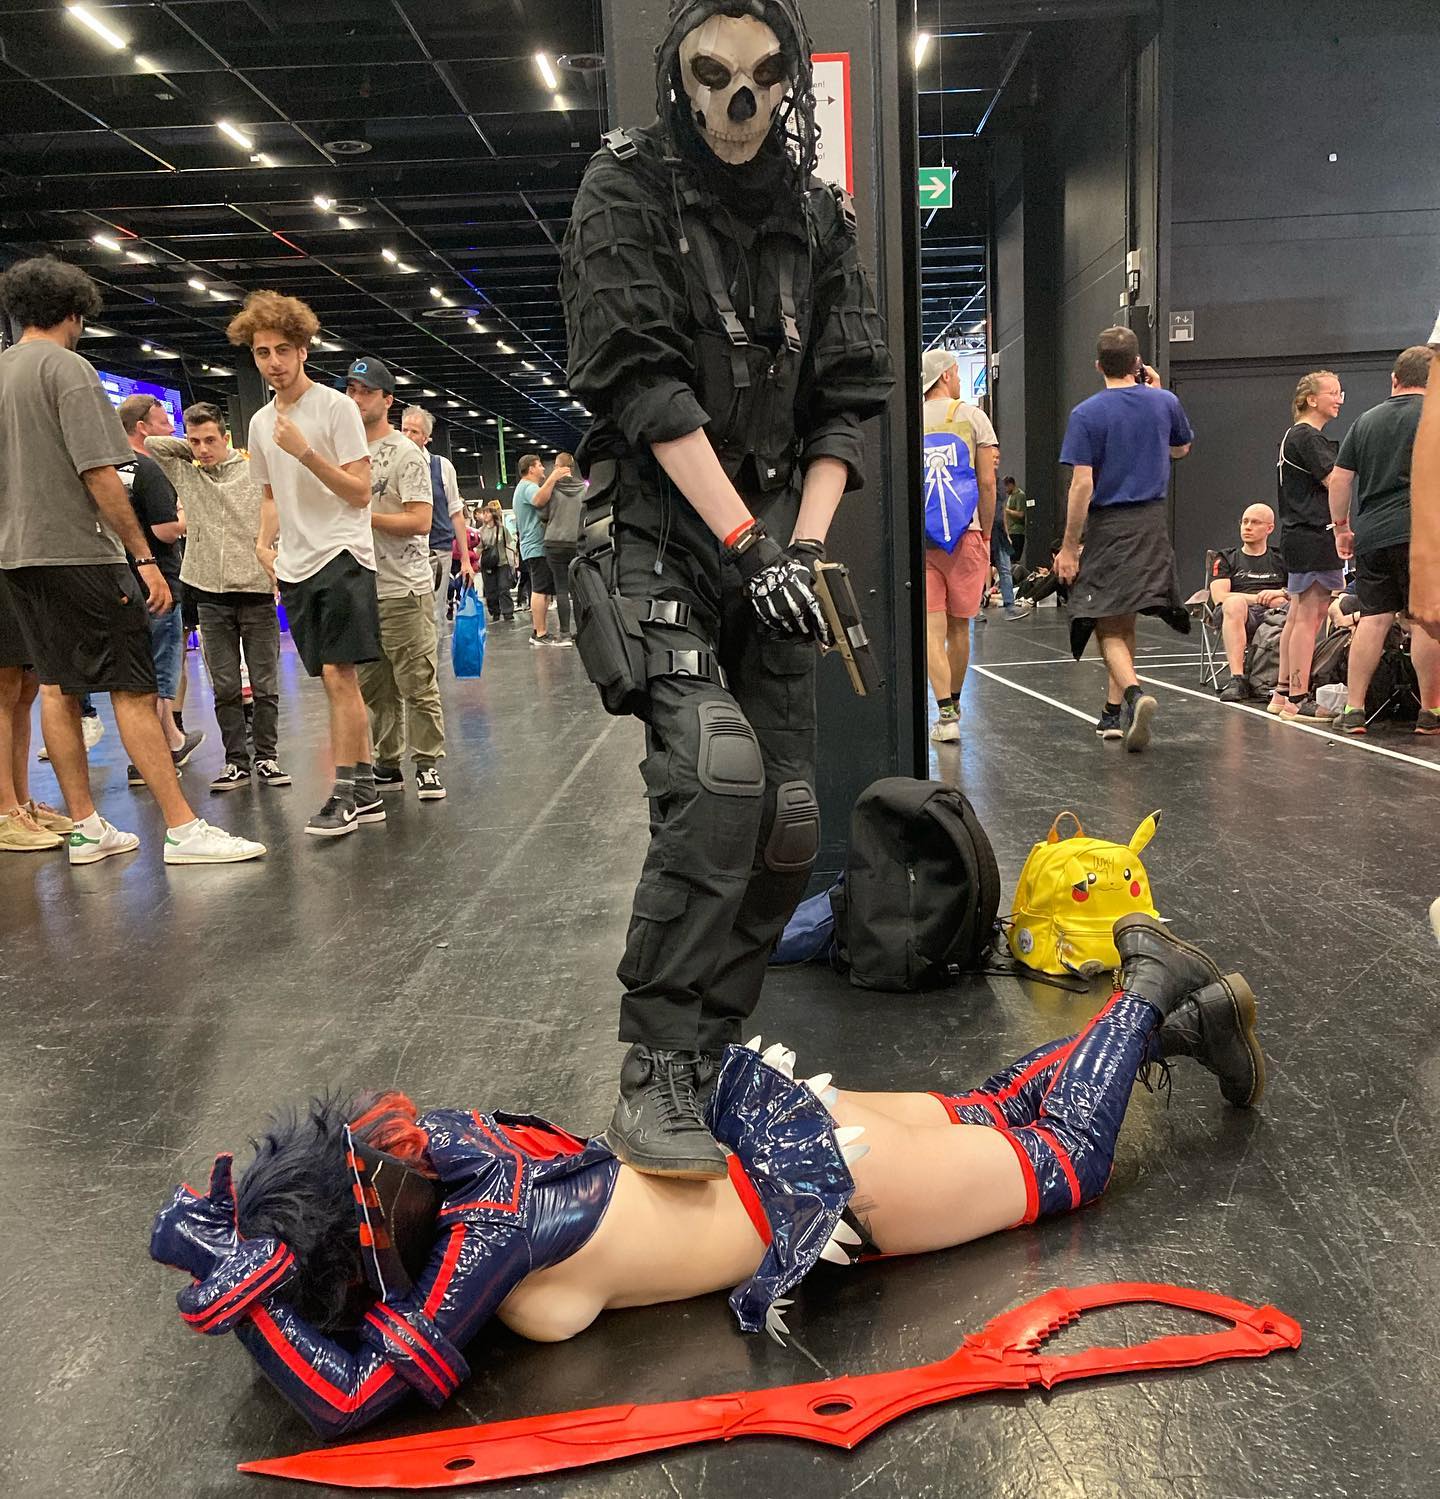 gamescom photo dump <3 
-
if you took a picture with me please send it to me so i can put it in a collage !!🙏
-
big thank you to @xtom.kr , @saftsack_lehon , @h0ly_cos  and all of her friends for making gamescom an unforgettable event for me 🫶 and to everyone of you as well ofc 💖 big kiss for all of u ‼️
-
tags!
-
#gamescom #gamescom2023 #ryukomatoi #ryukocosplay #ryukomatoicosplay #ryukomatoikilllakill #killlakill #killlakillcosplay #killlakillryuko #anime #animecosplay #gaming #cosplay #cosplayer #cosplaying #cosplaygirl #viral